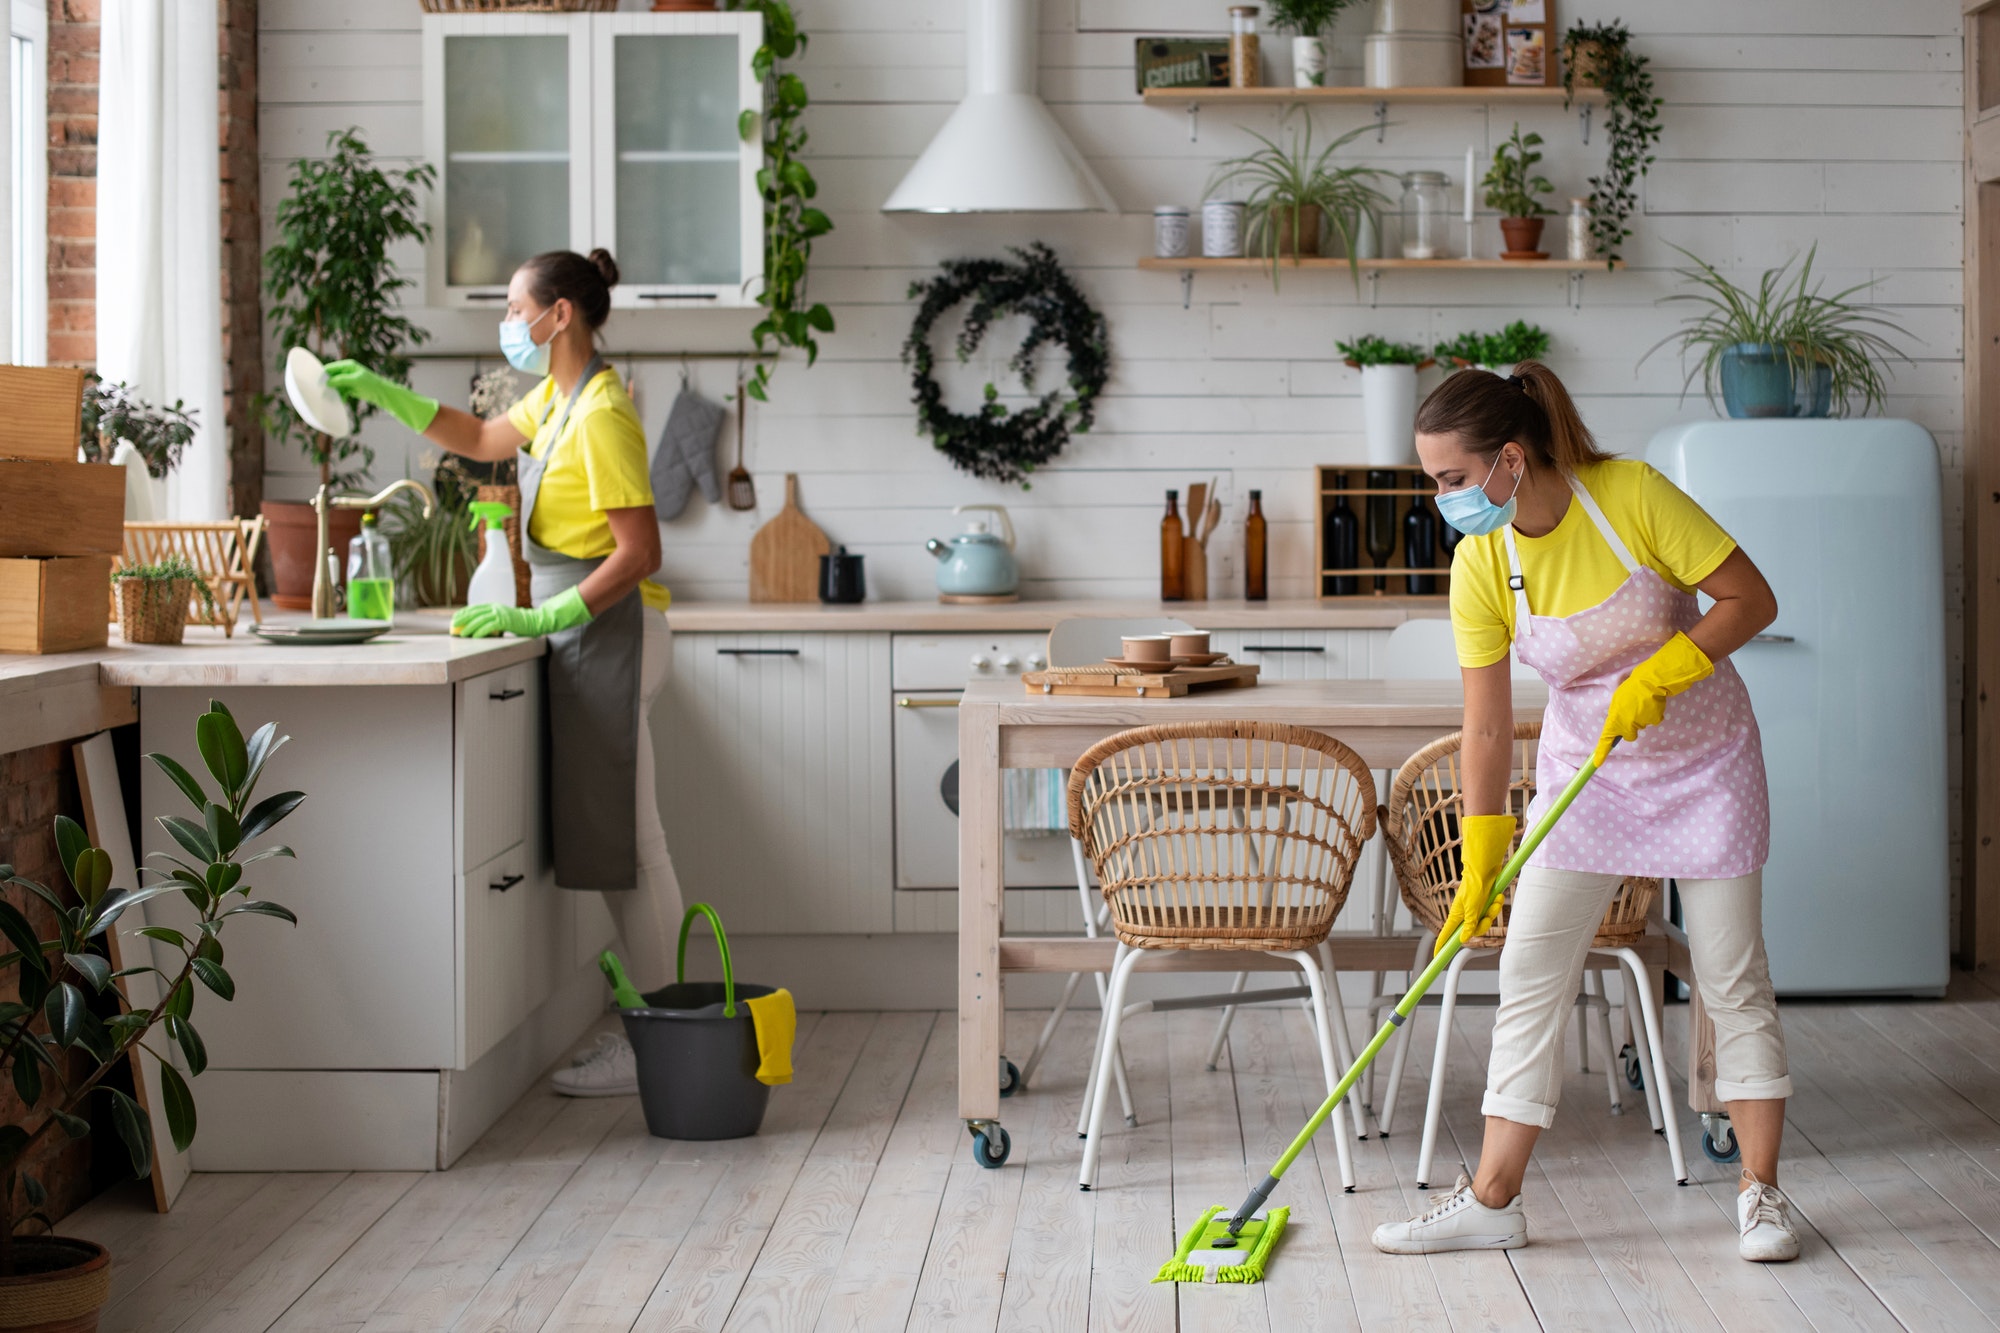 general-cleaning-of-the-kitchen-professional-housekeeping-service-.jpg